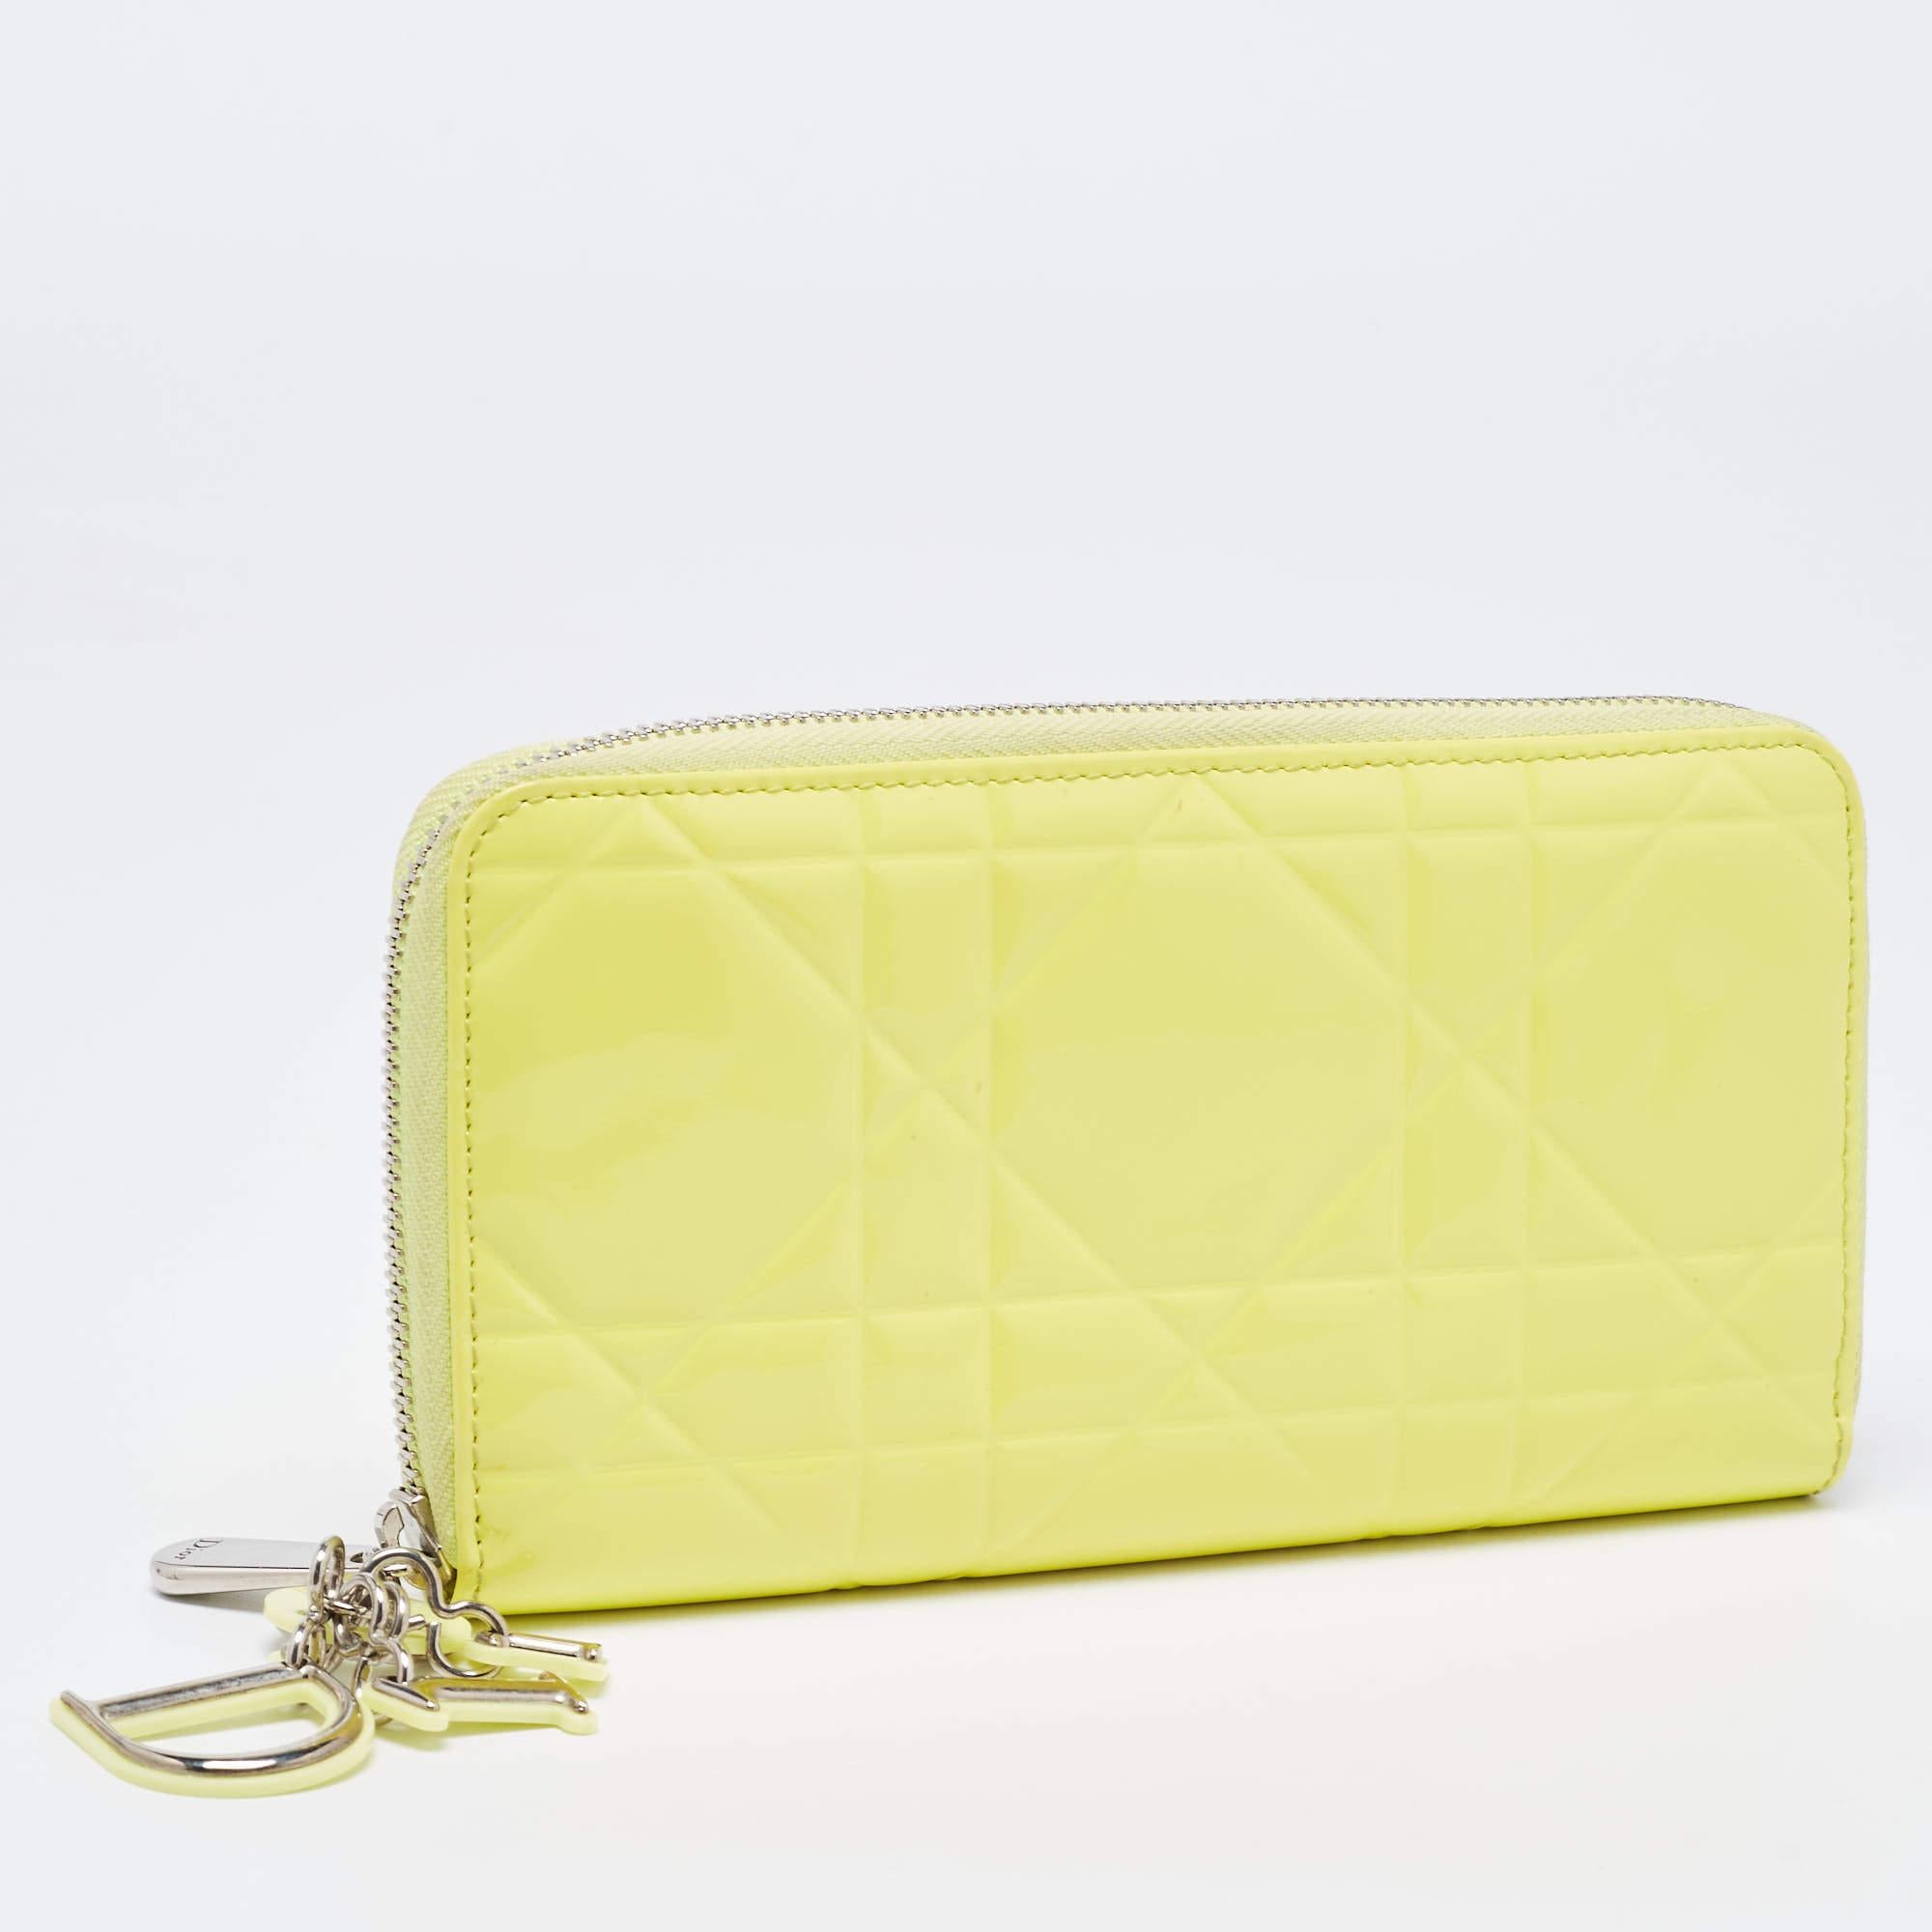 Dior Yellow Cannage Patent Leather Lady Dior Continental Wallet In Good Condition For Sale In Dubai, Al Qouz 2